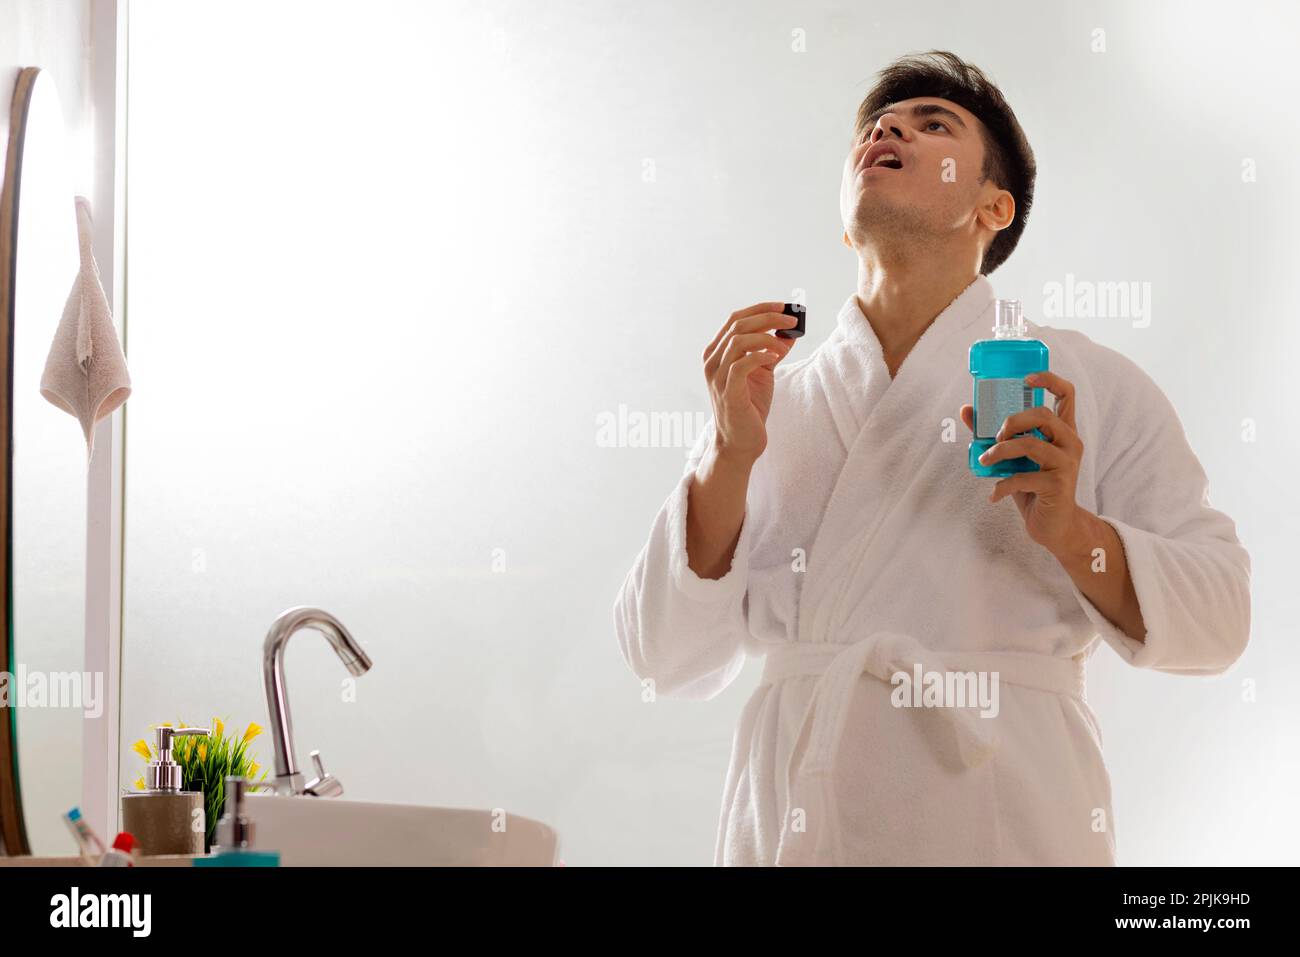 Young man gargling with mouthwash in bathroom Stock Photo